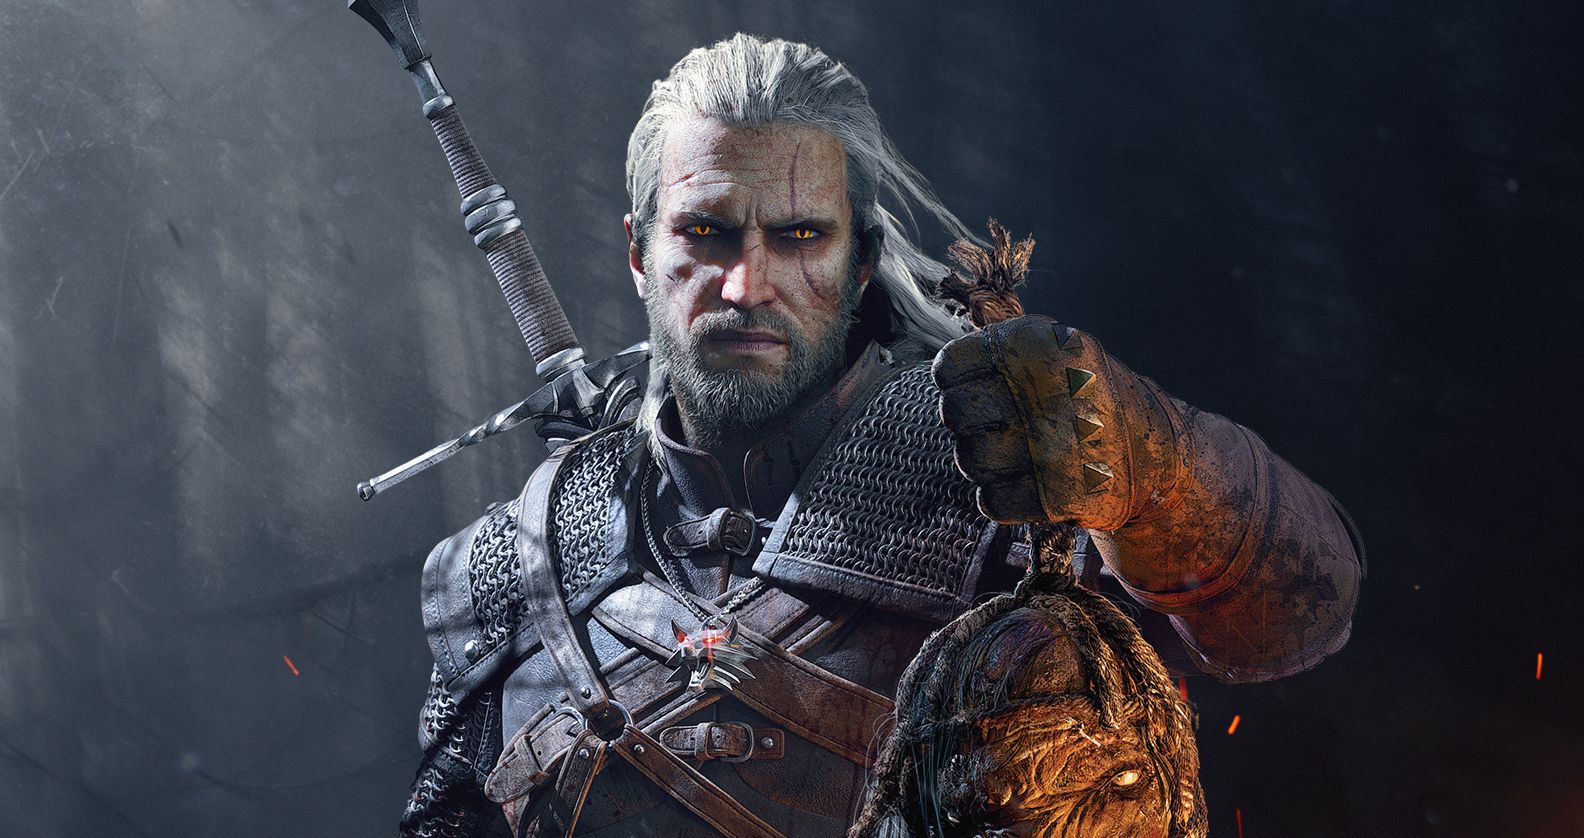 Image for "I know nothing about The Witcher 4," says Geralt voice actor - but you may see him in Cyberpunk 2077